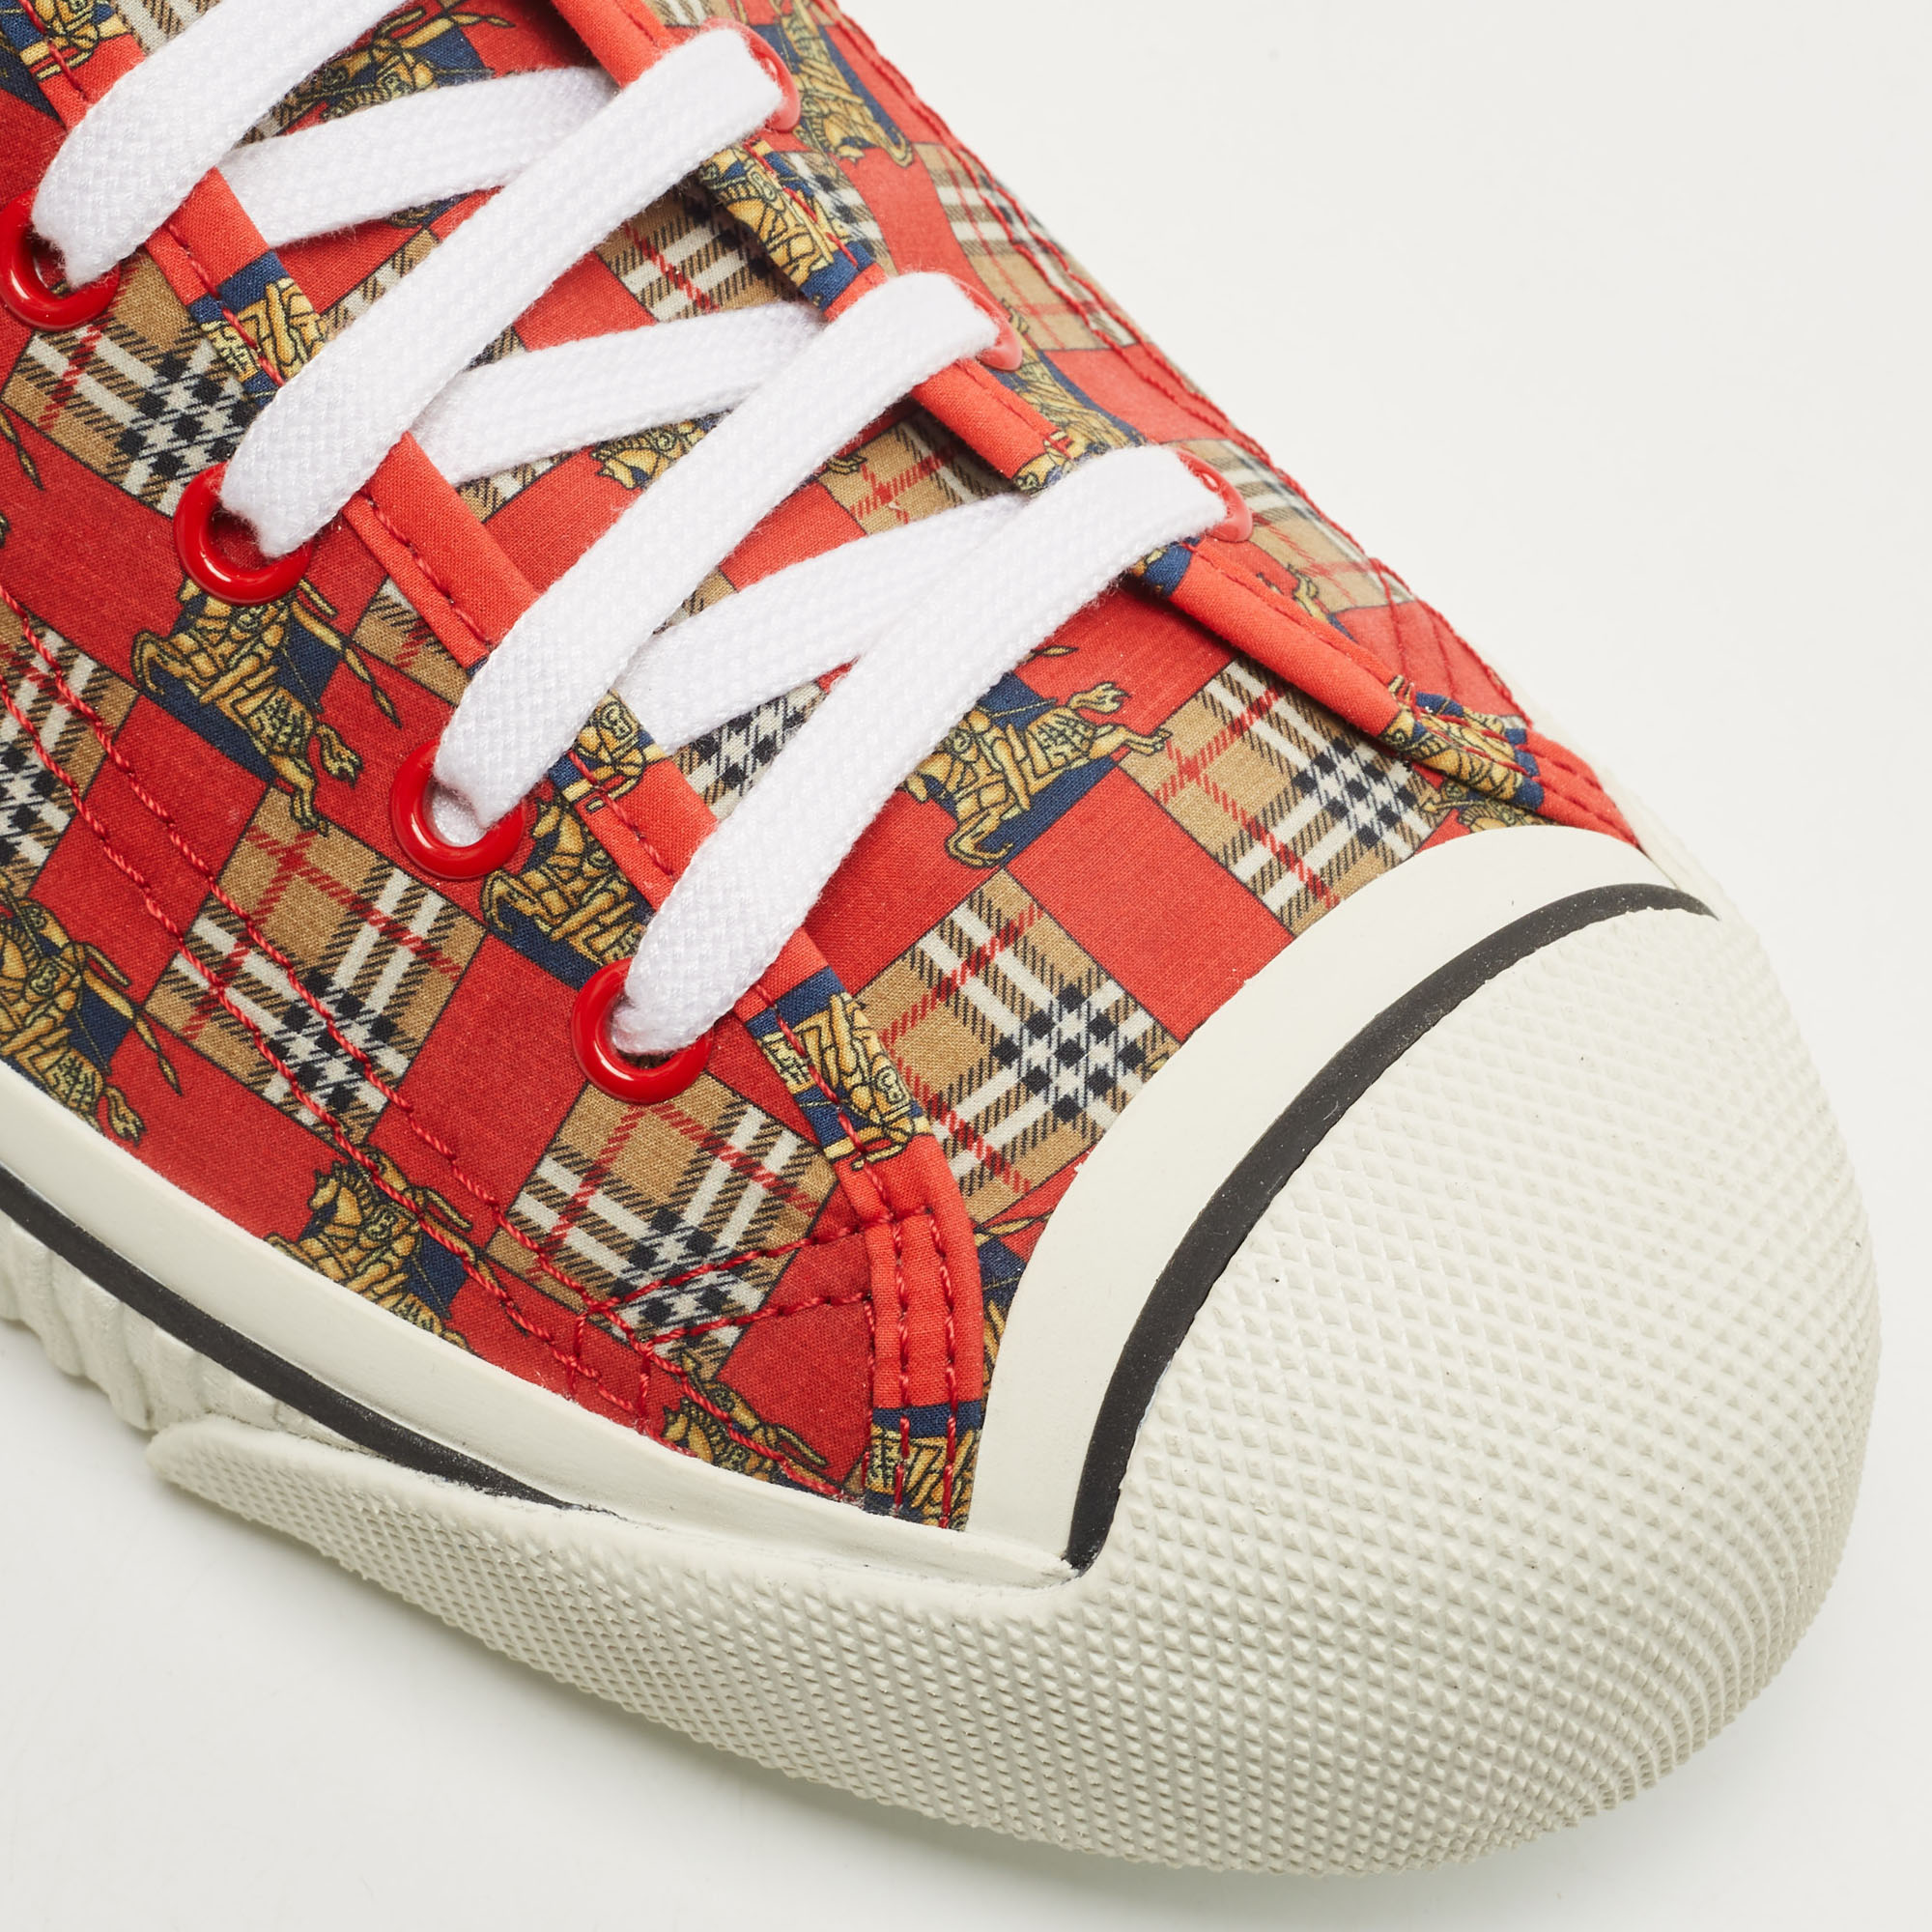 Burberry Red Check Fabric Kingly High Top Sneakers Size 45